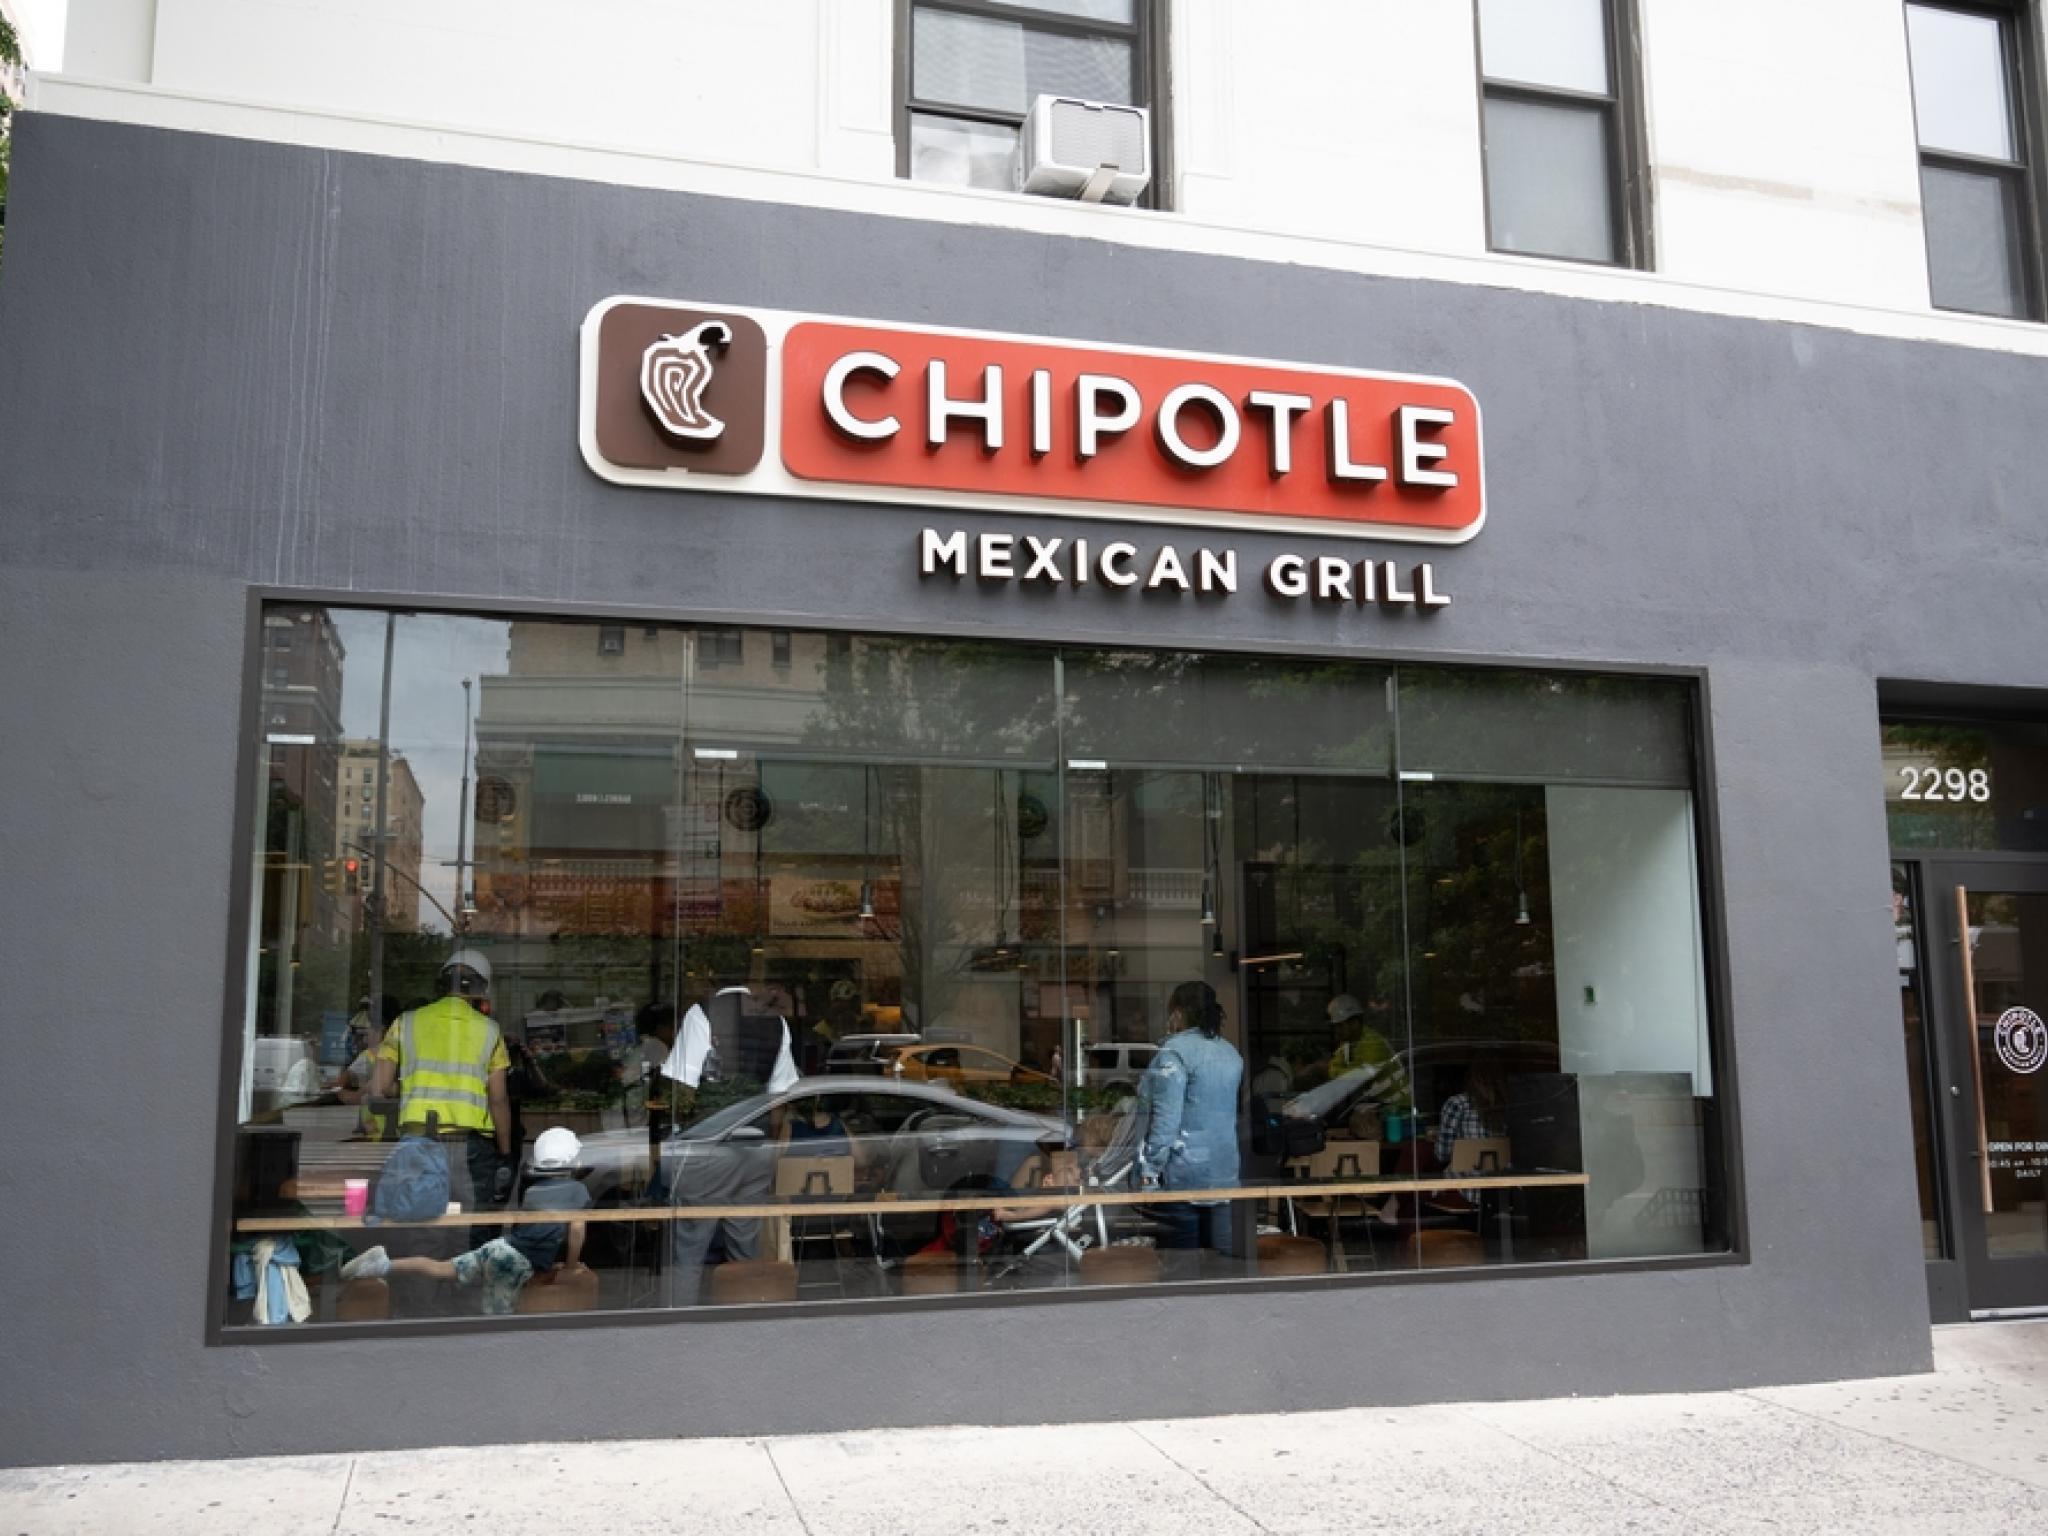 Chipotle Mexican Grill Analysts Raise Their Forecasts After Better-Than-Expected Earnings